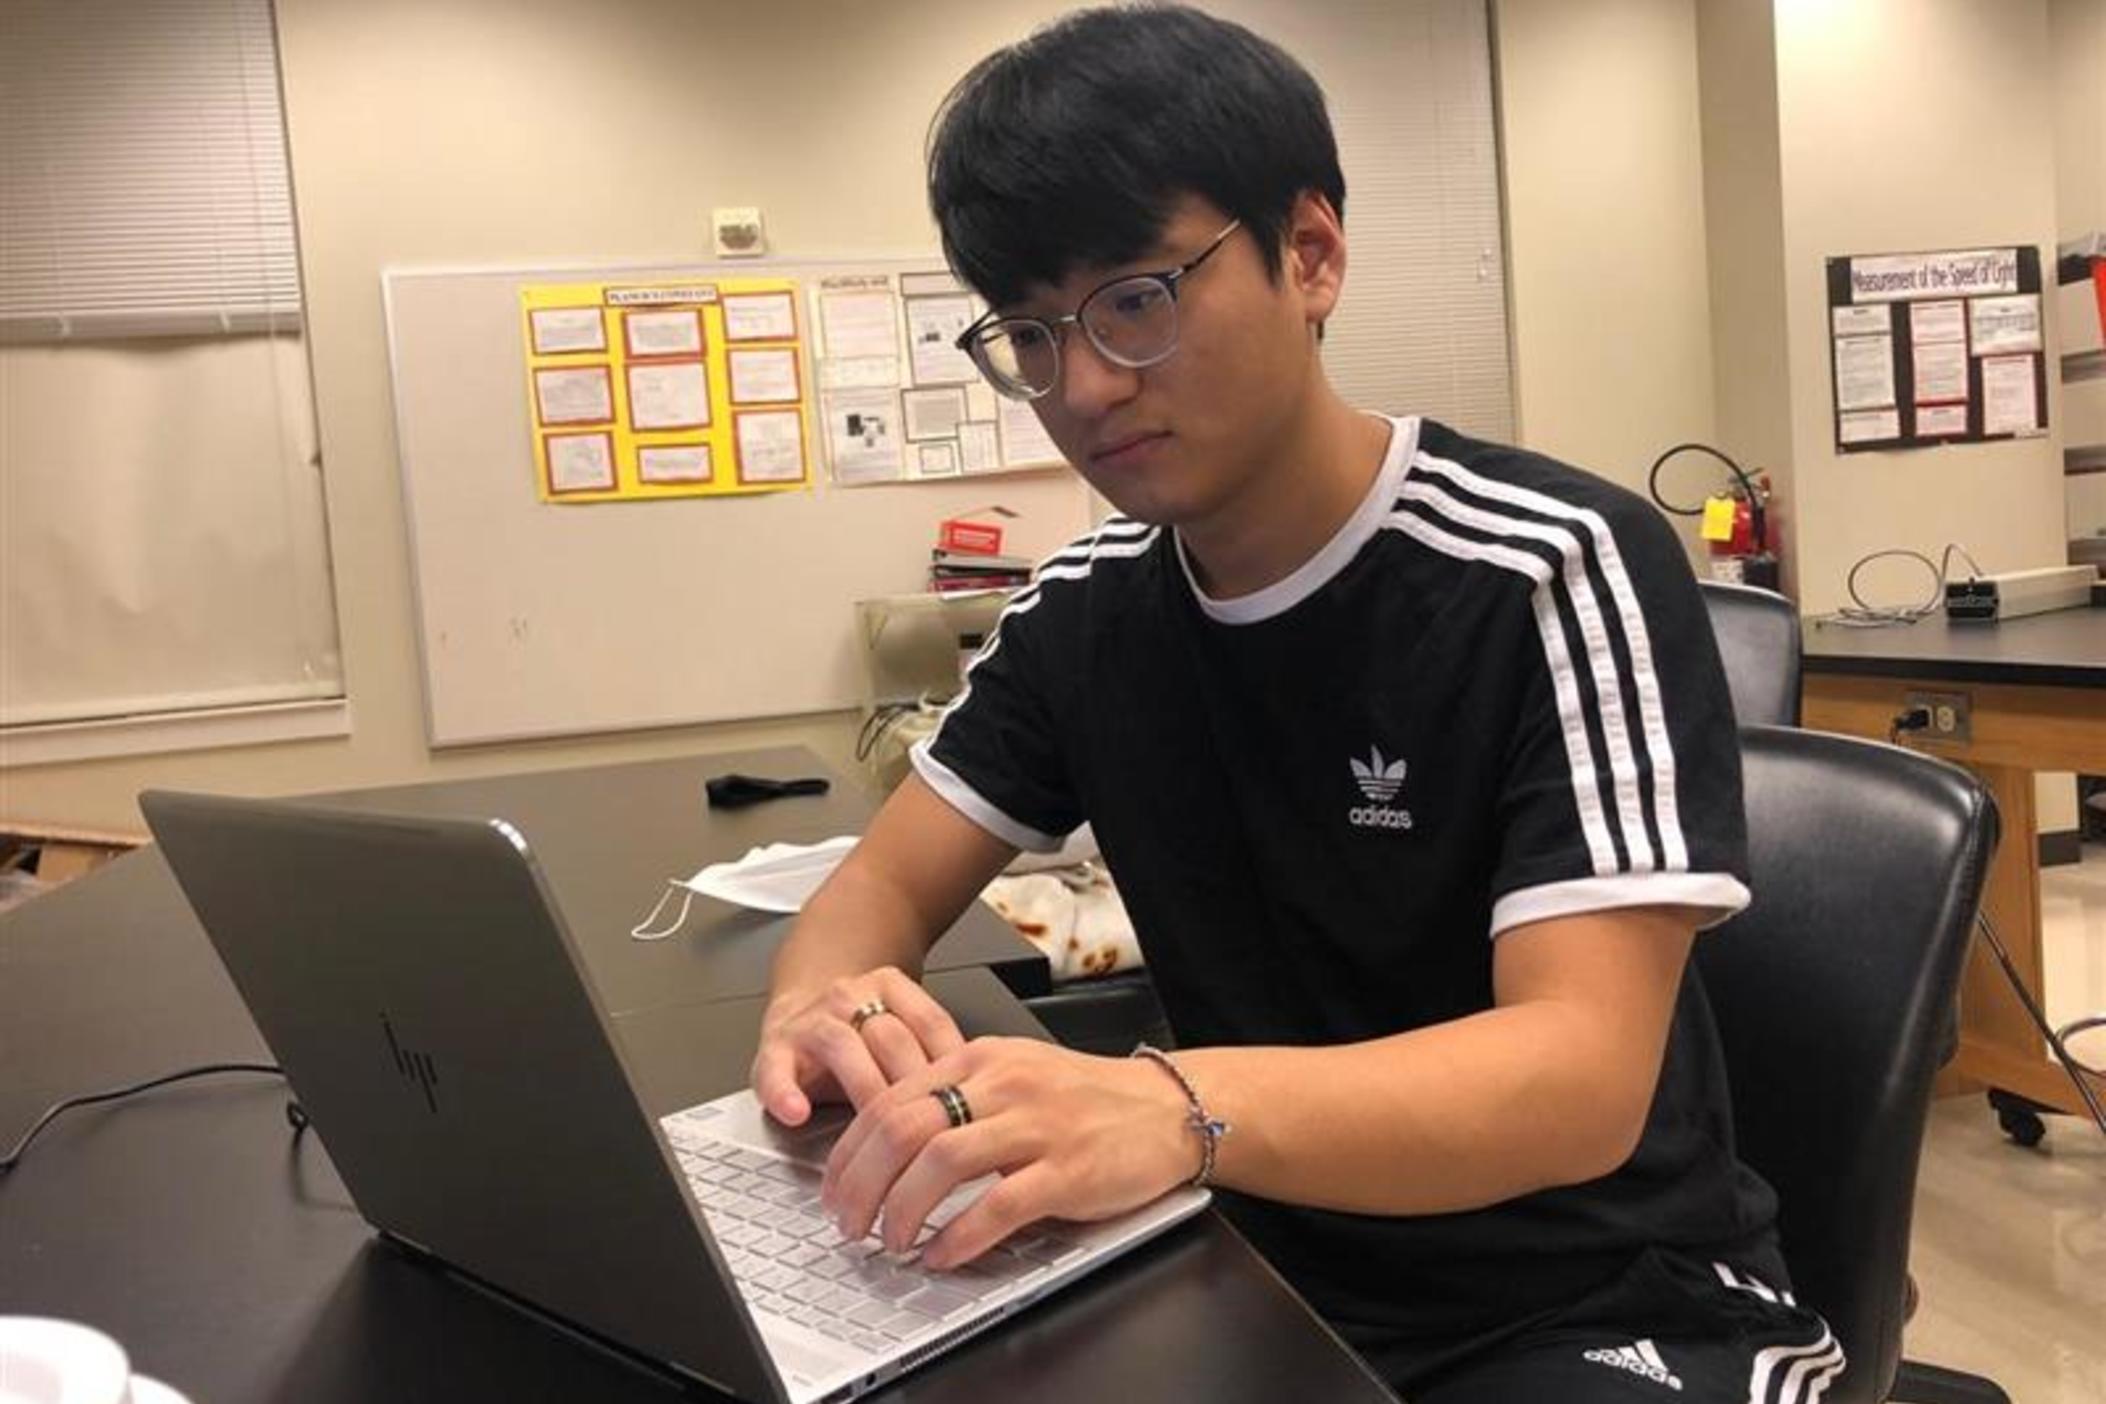 Emory University student Cynclaire Choi, a Korean-born naturalized American citizen, says he and other Asian students have faced intensified hate speech and behaviors during the coronavirus pandemic.